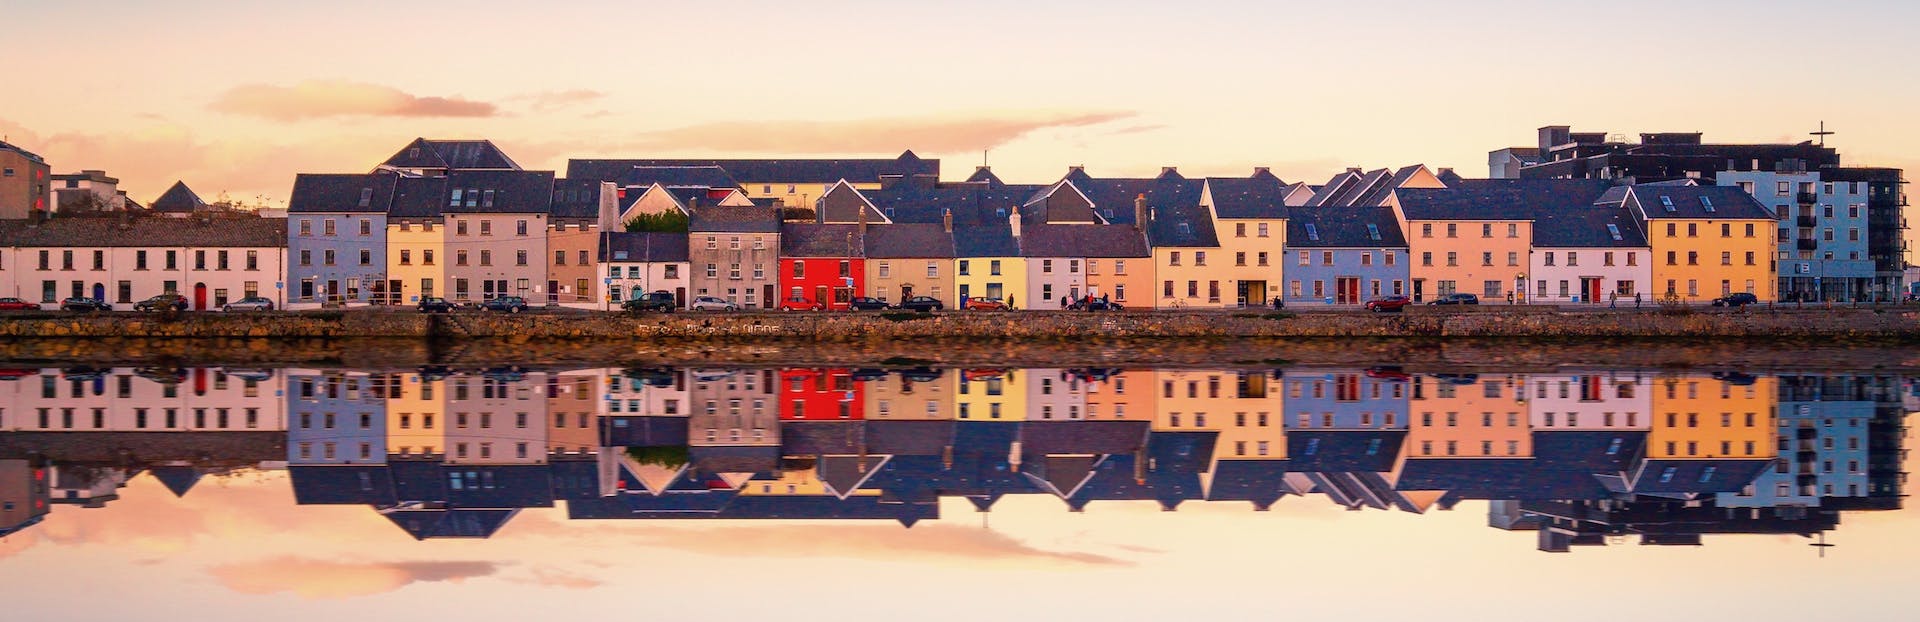 Learn about lassies, castles and battles on a self-guided audio tour in Galway